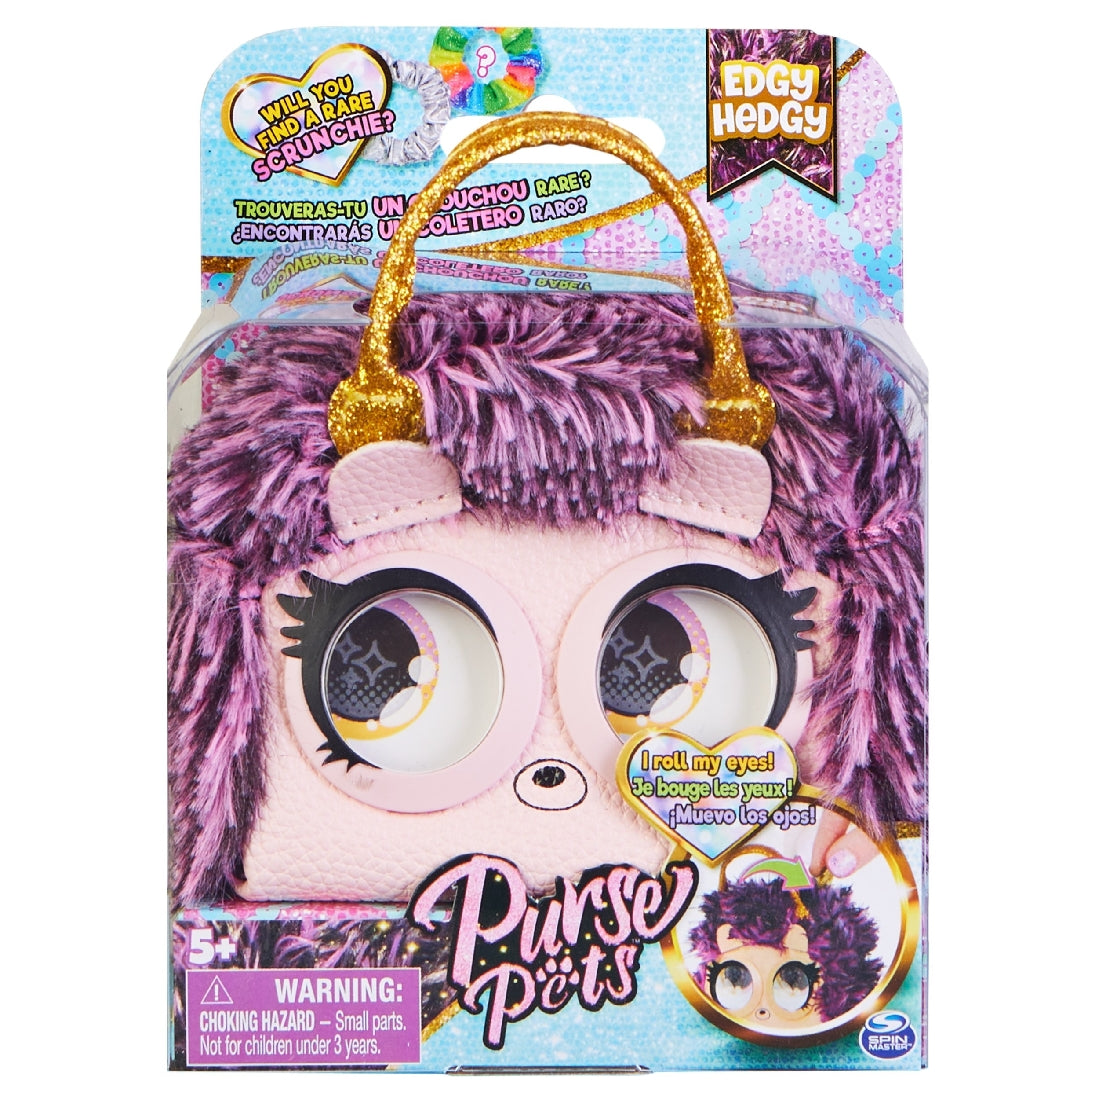 PURSE PETS MICRO ASST - EDGY HEDGY